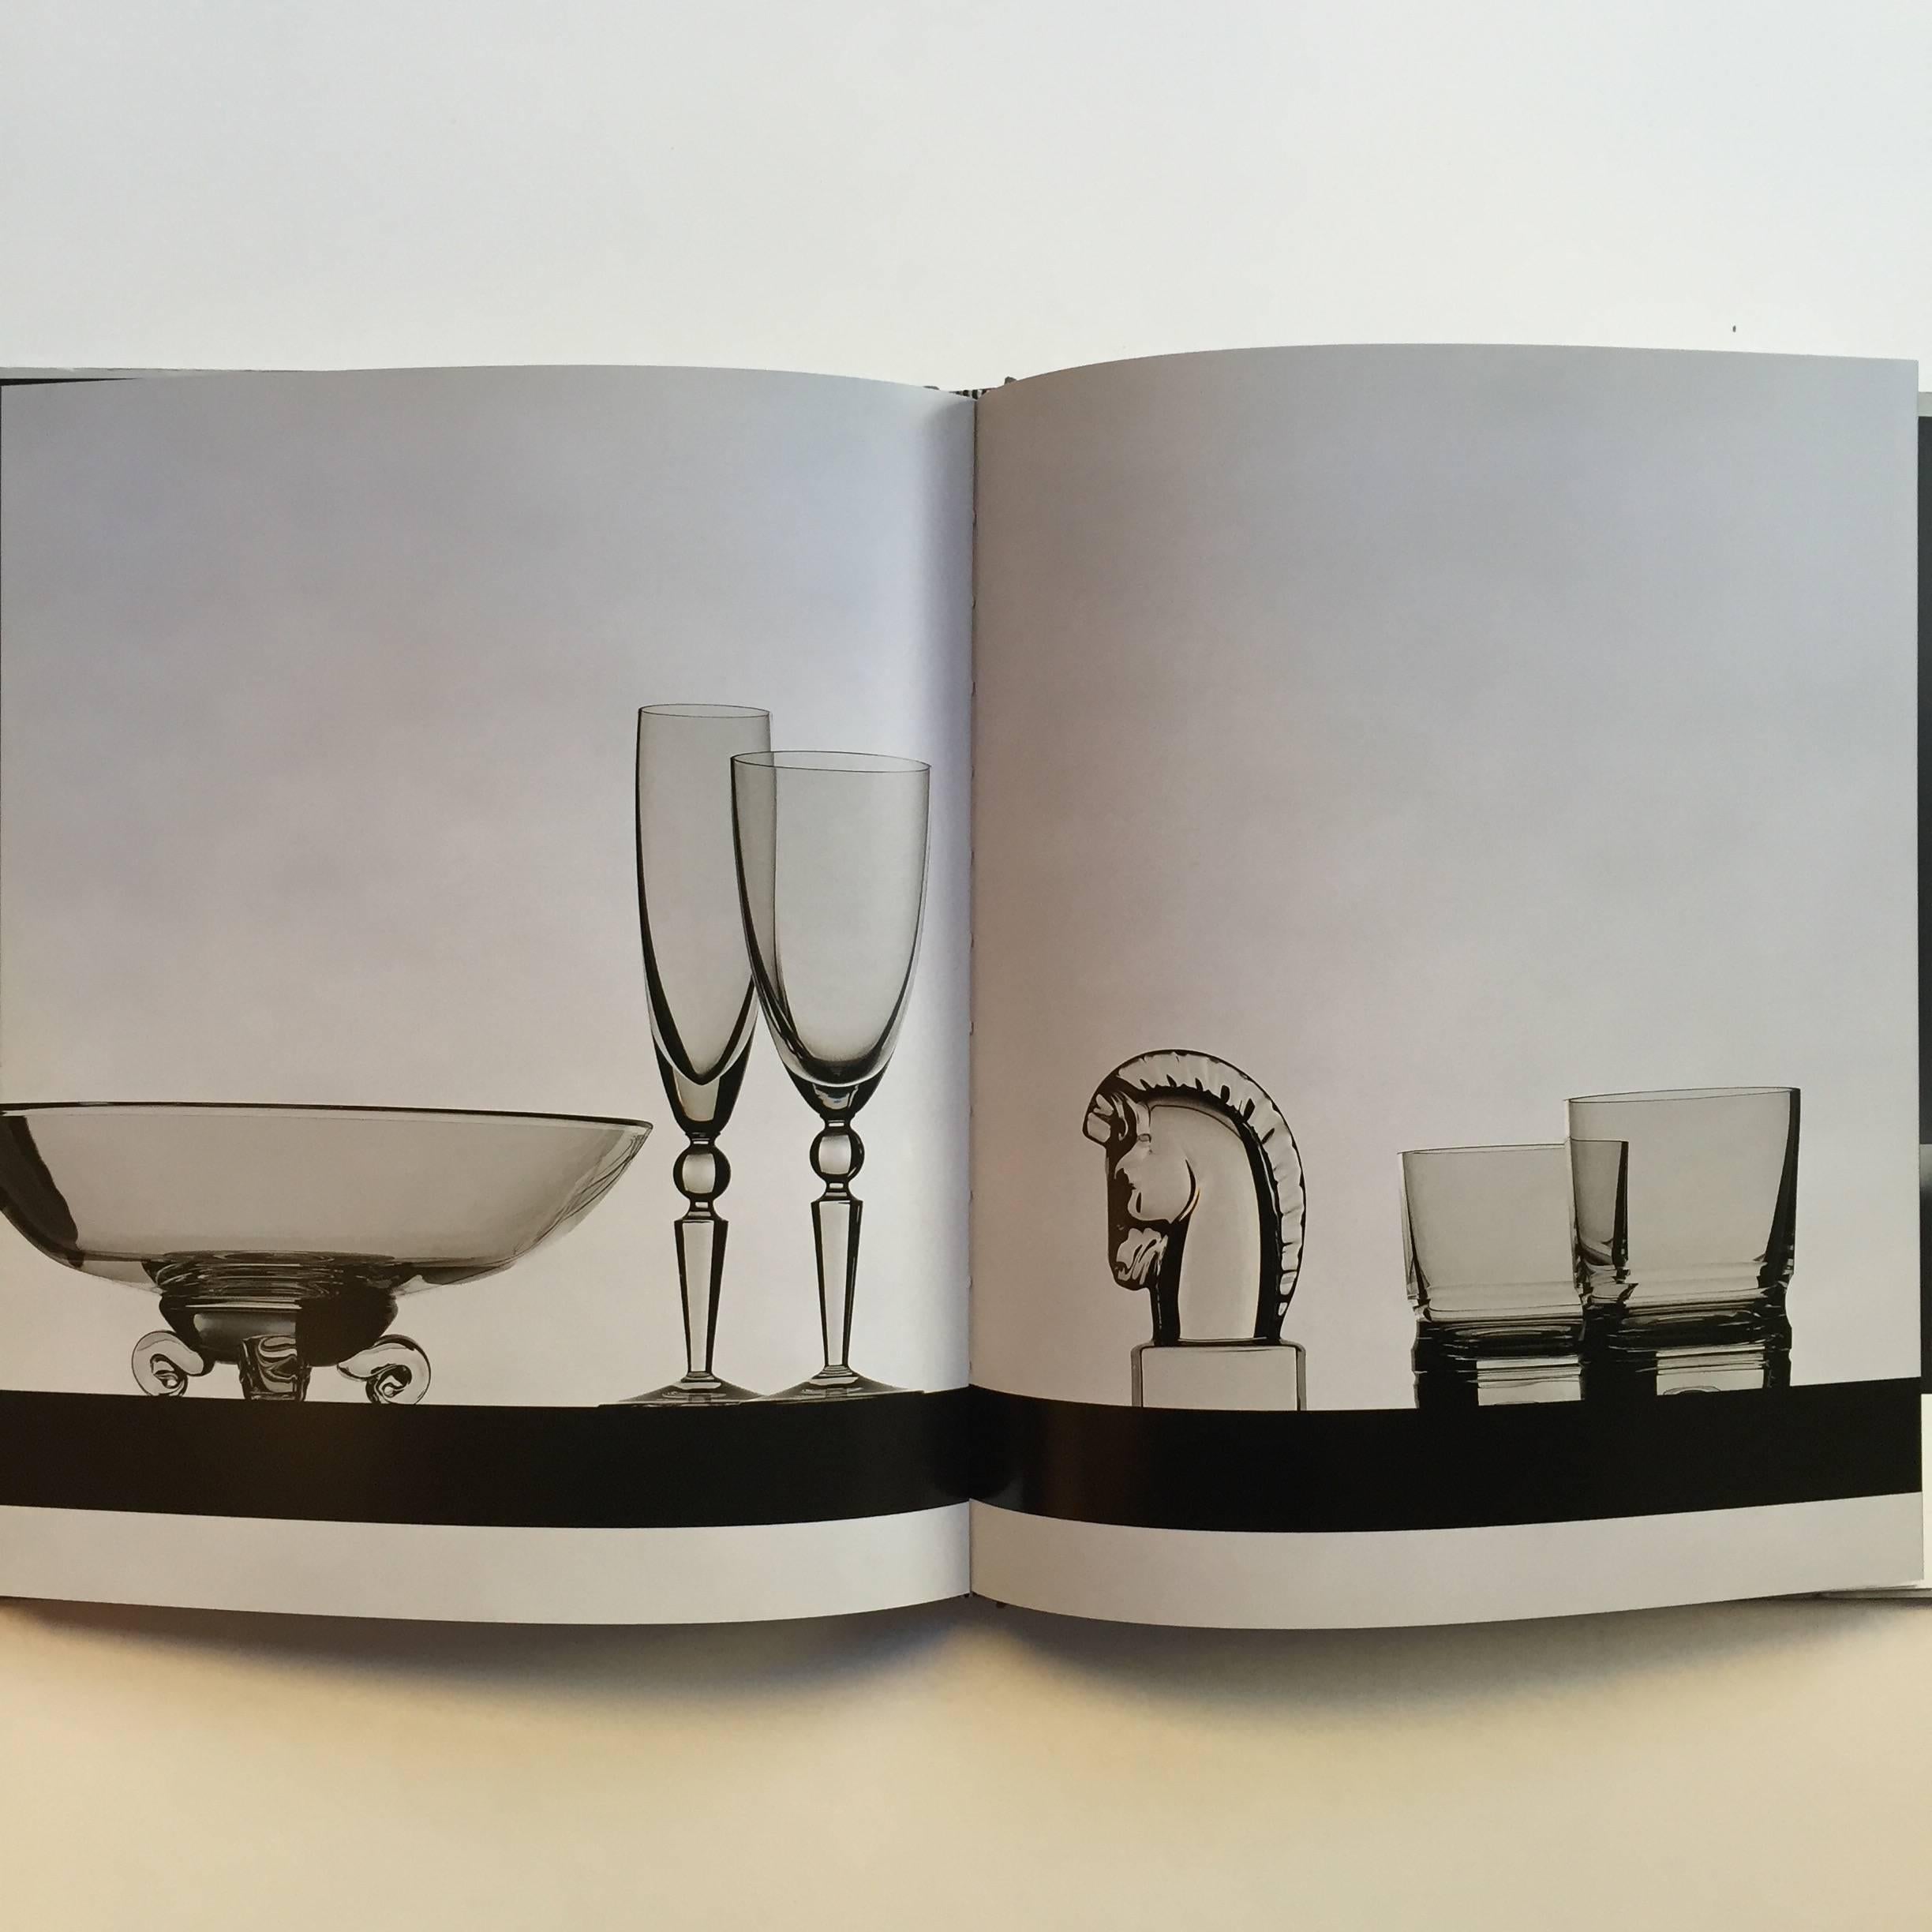 American Steuben Design, a Legacy of Light and Form